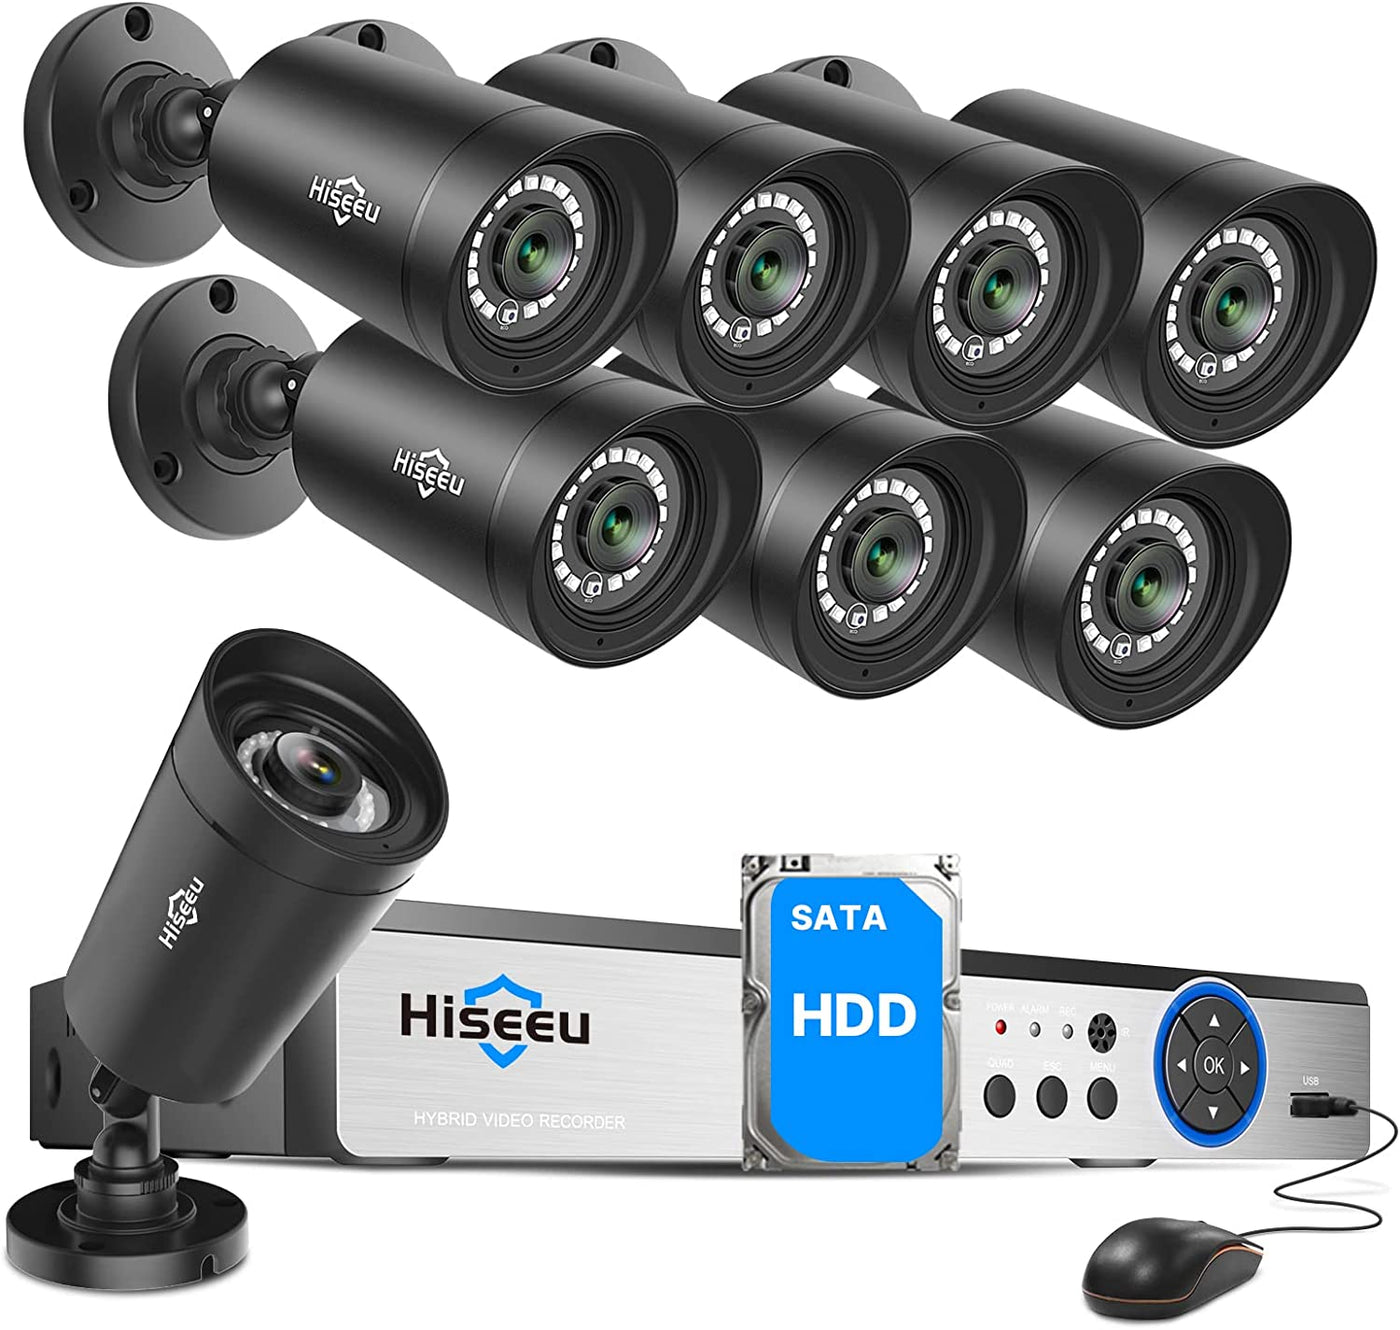 8CH Hiseeu Security Camera System, 3TB HDD Home CCTV Camera Security System w/8pcs 1080P Indoor&Outdoor Security Cameras, Face Detection, Instant APP Alert, Playback, Night Vision for 7/24 Record（Refurbished）